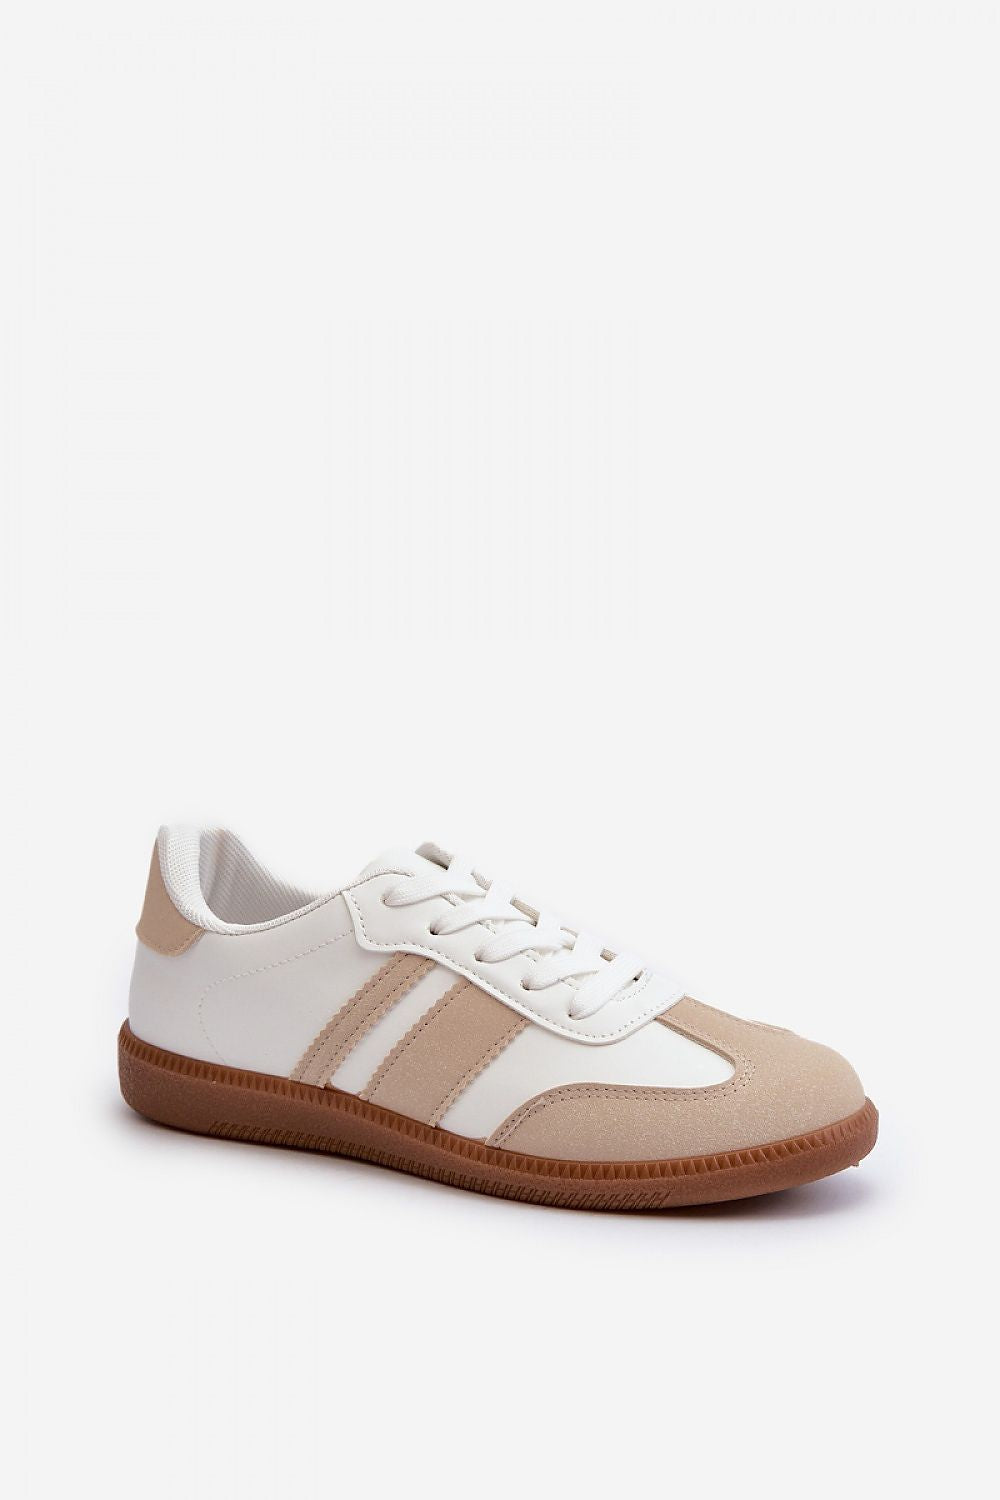 Sport Shoes model 198516 Step in style